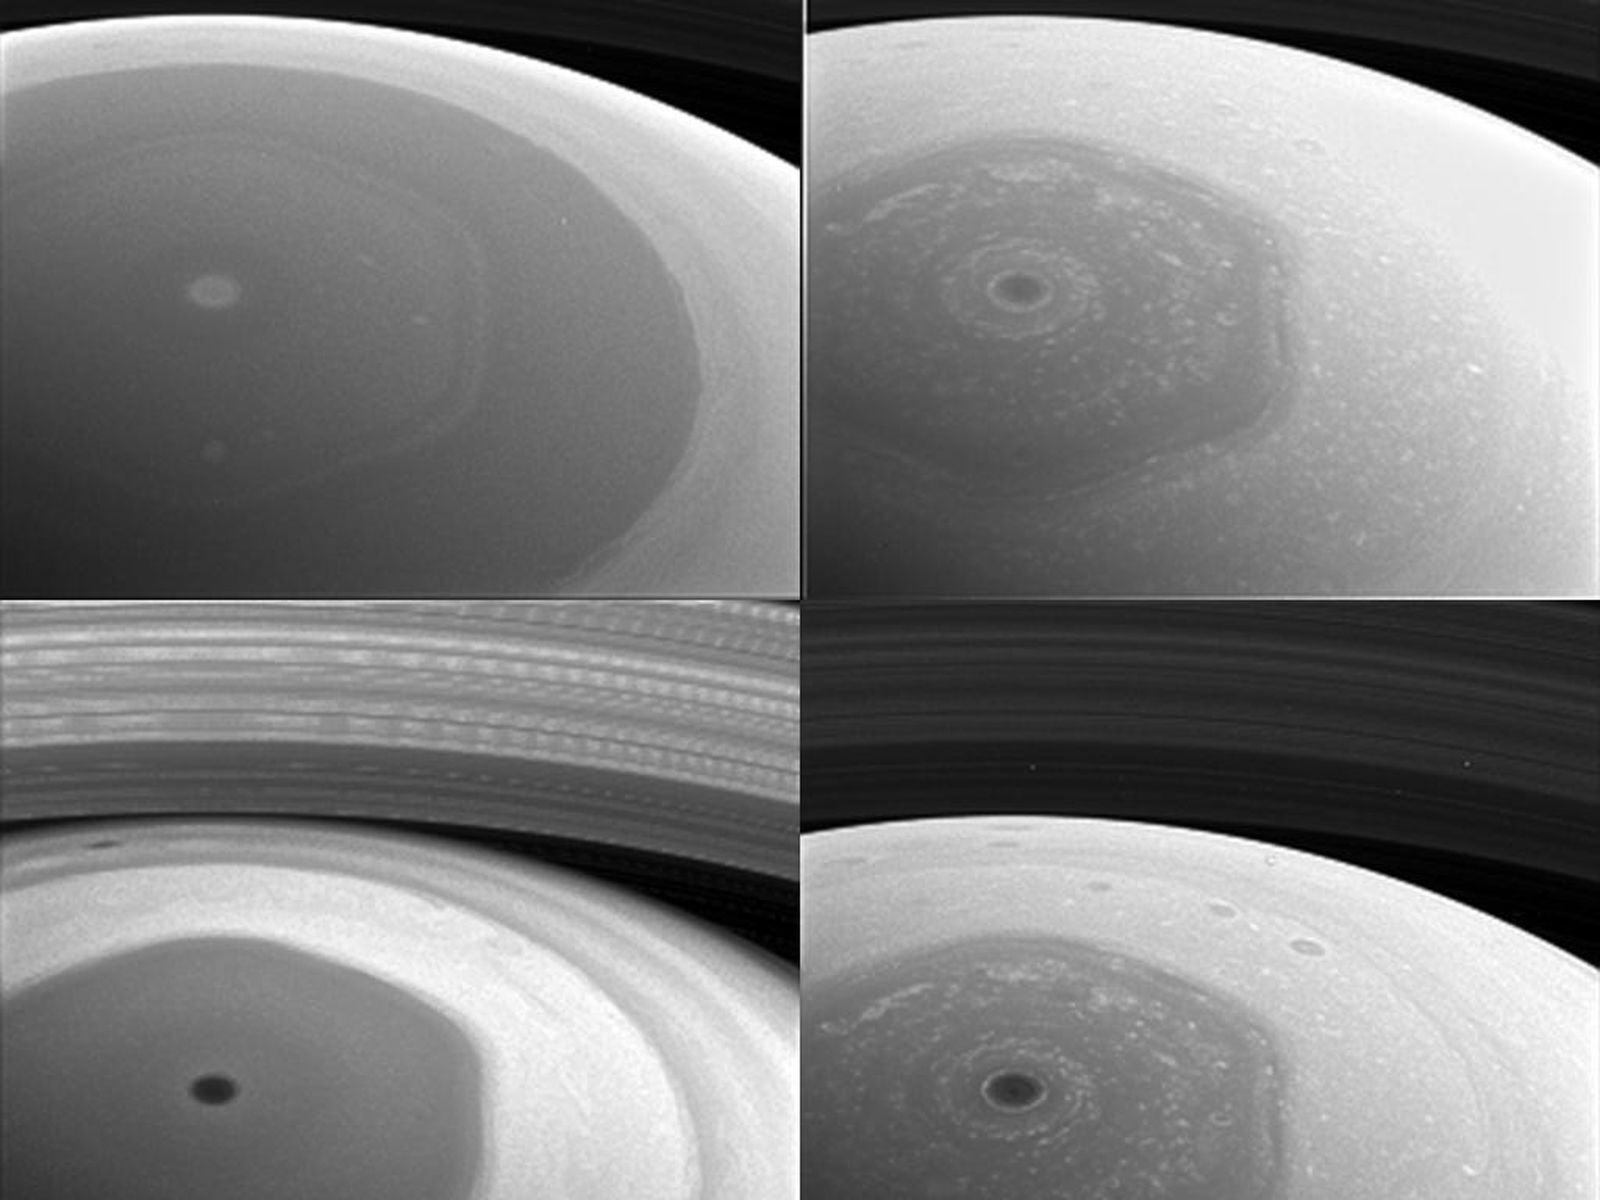 This collage of images from NASA's Cassini spacecraft shows Saturn's northern hemisphere and rings as viewed with four different spectral filters.